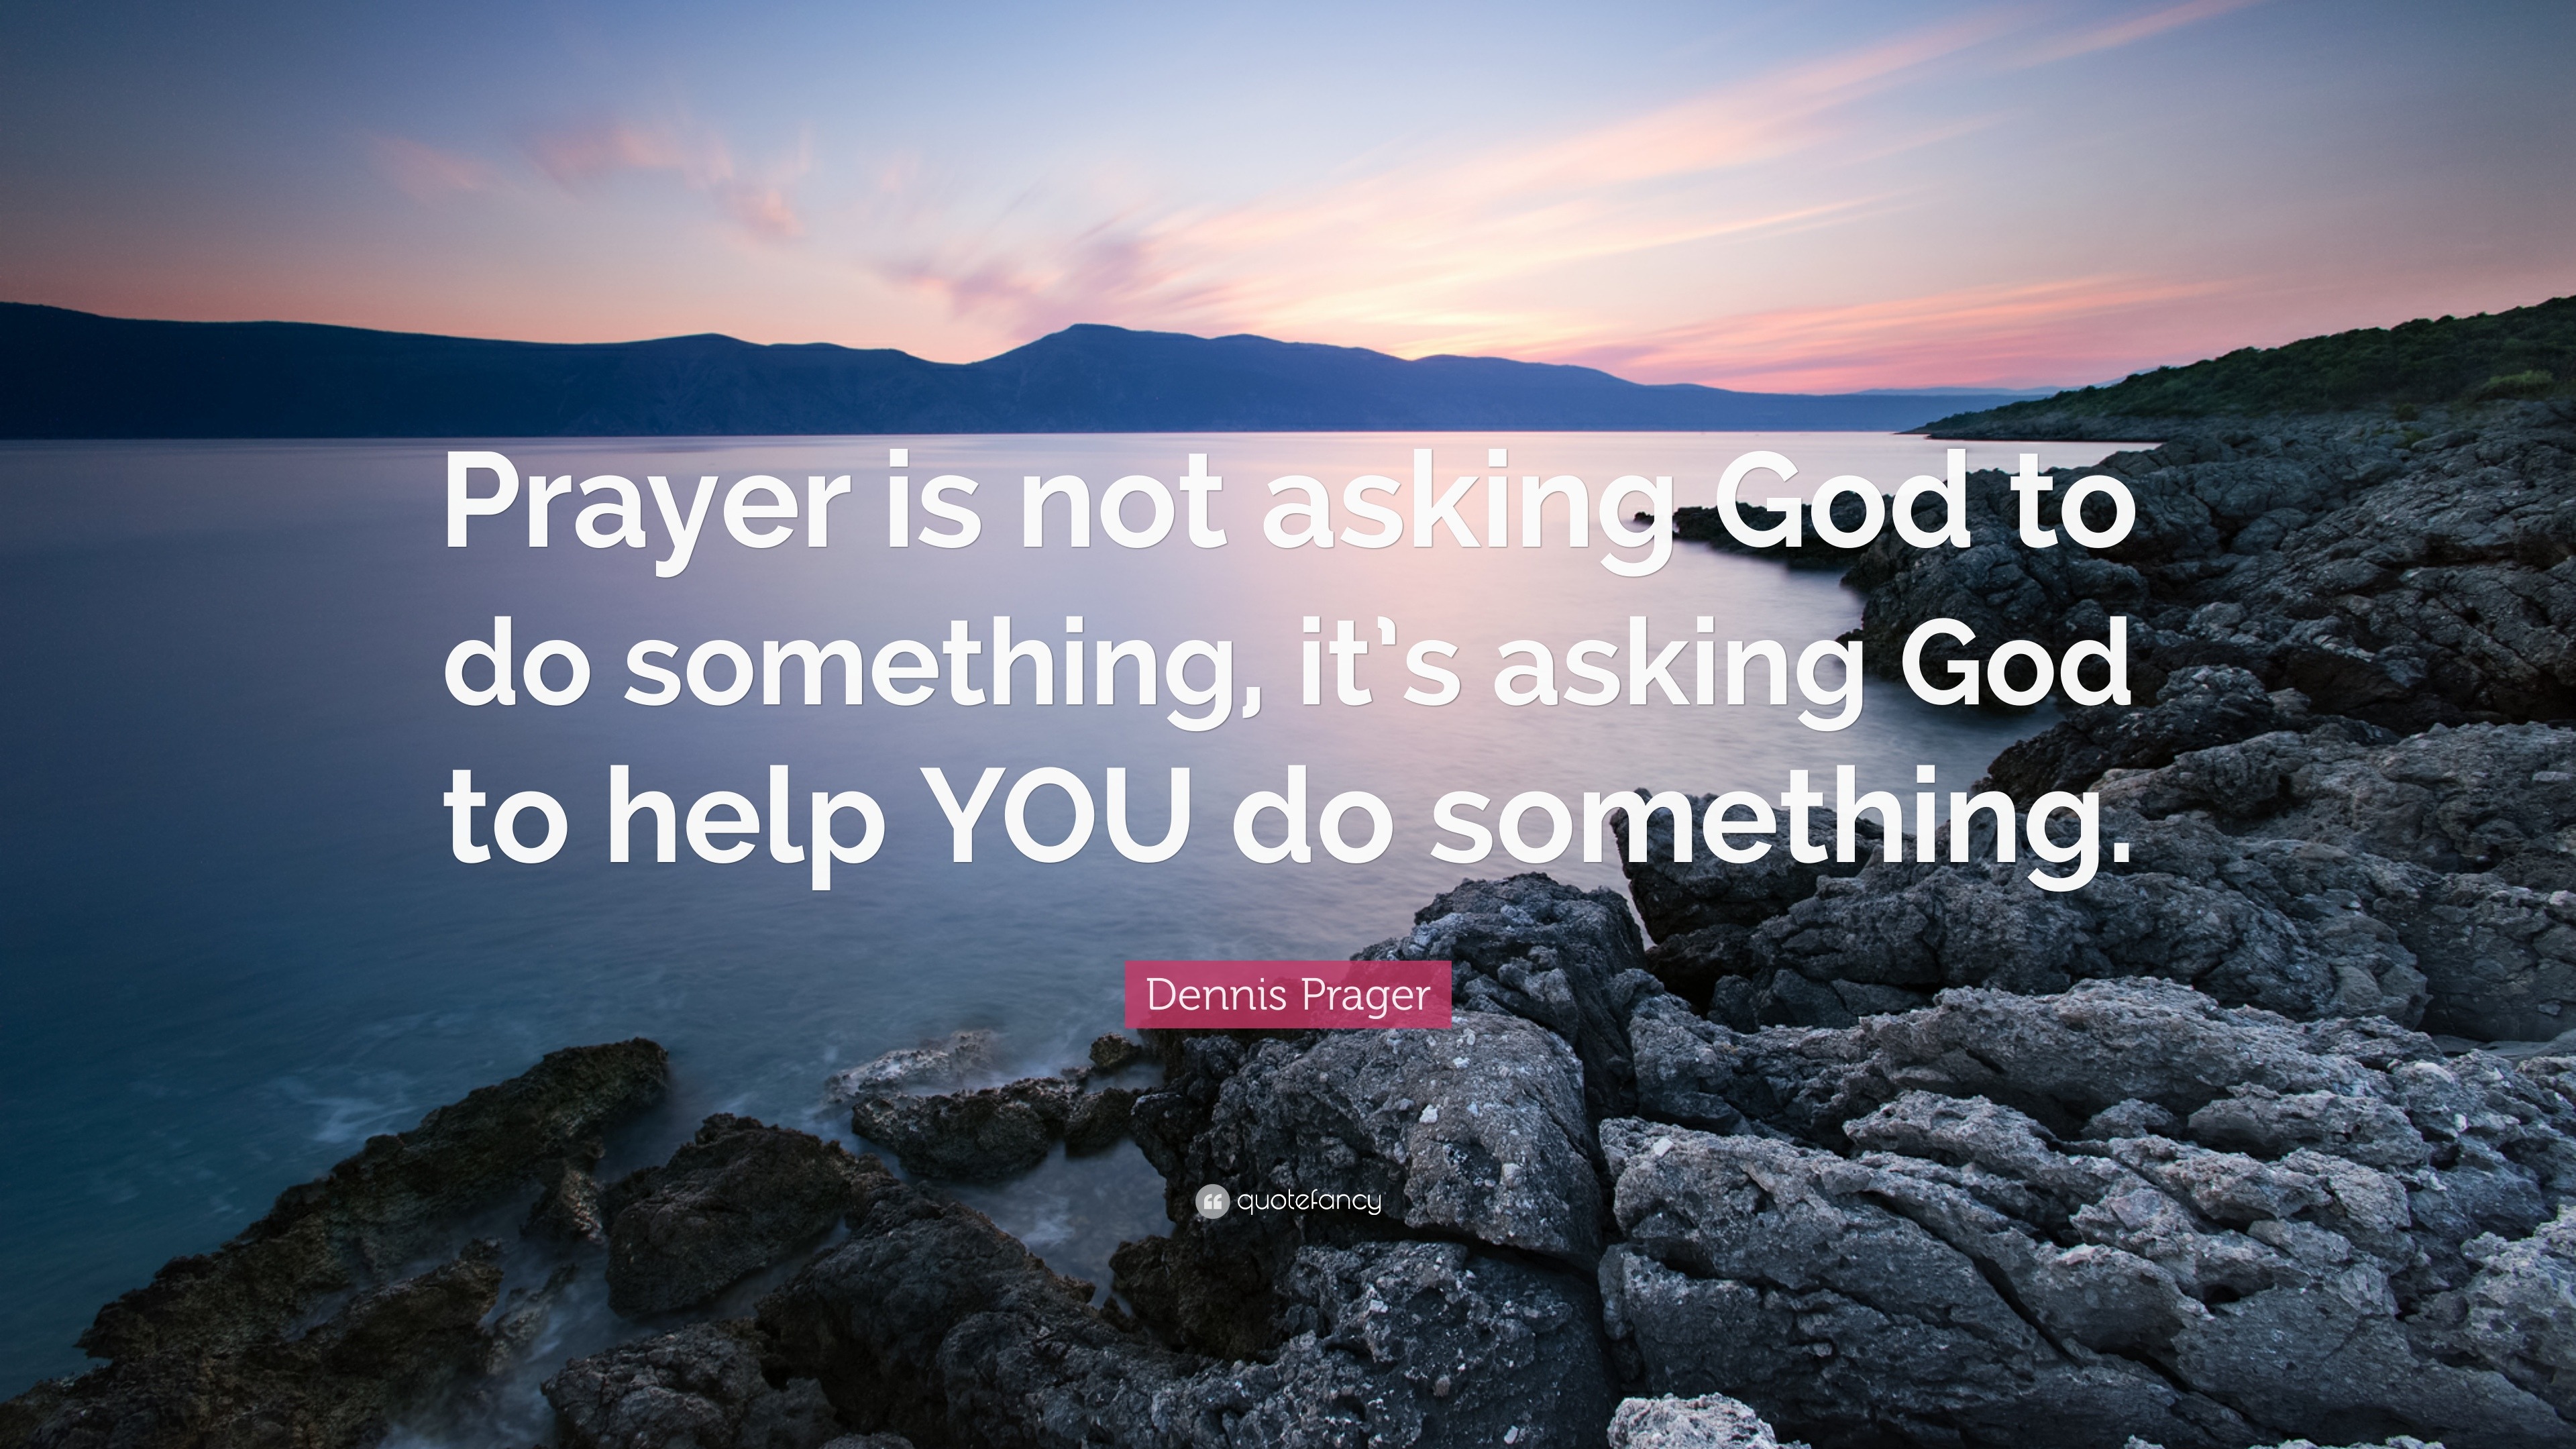 Dennis Prager Quote Prayer Is Not Asking God To Do Something It S Asking God To Help